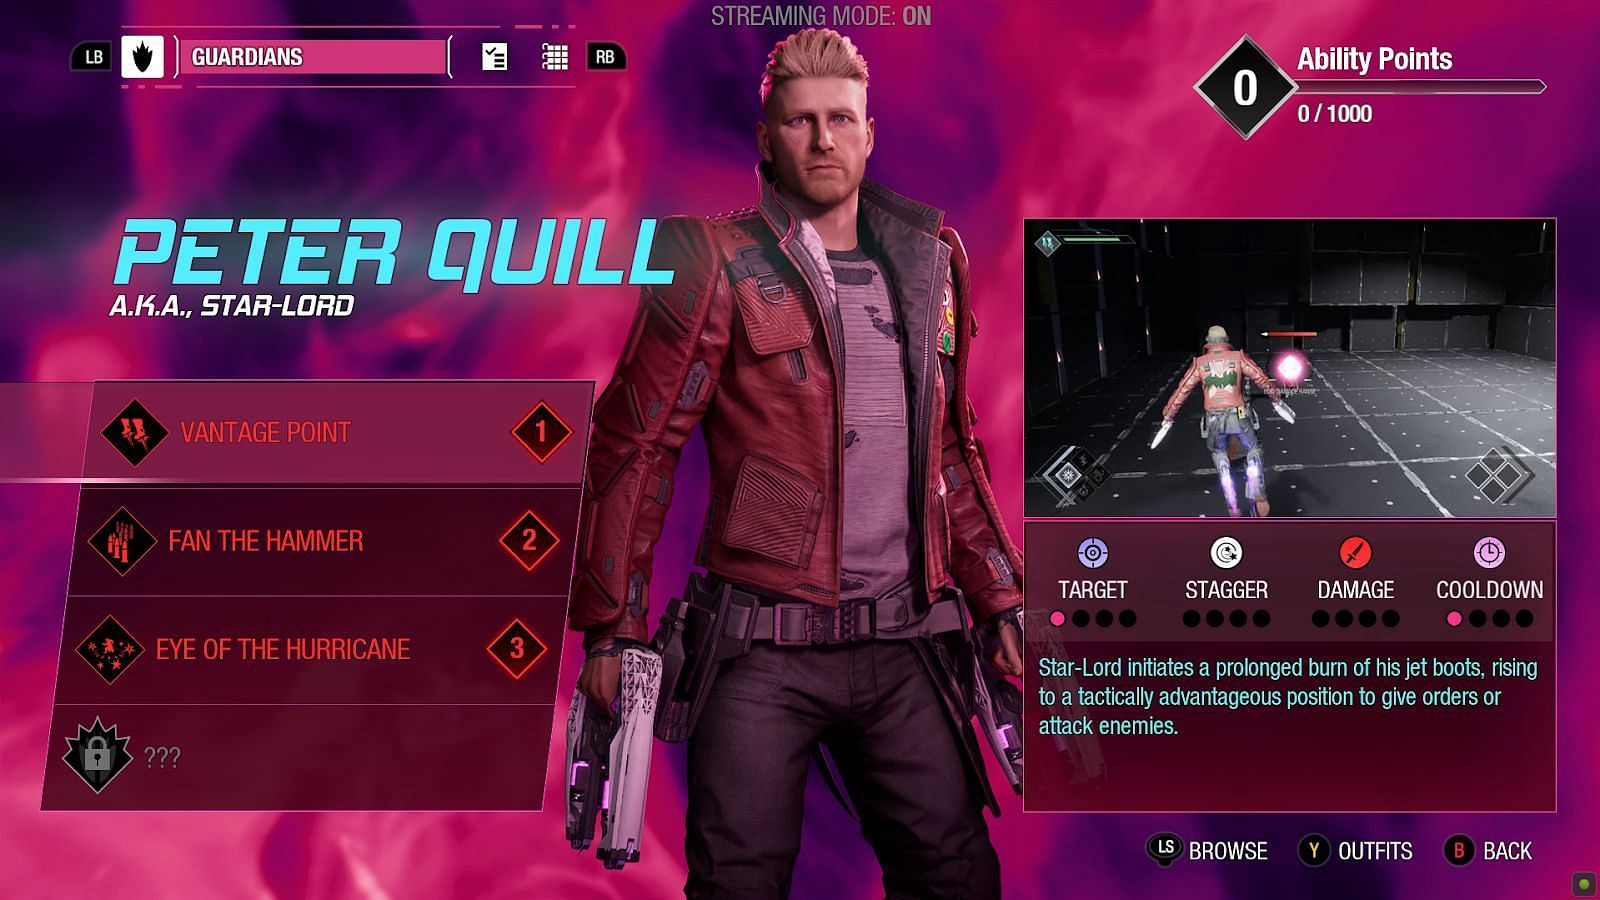 Abilities of Star-Lord (Screenshot via Marvel&rsquo;s Guardians of the Galaxy)